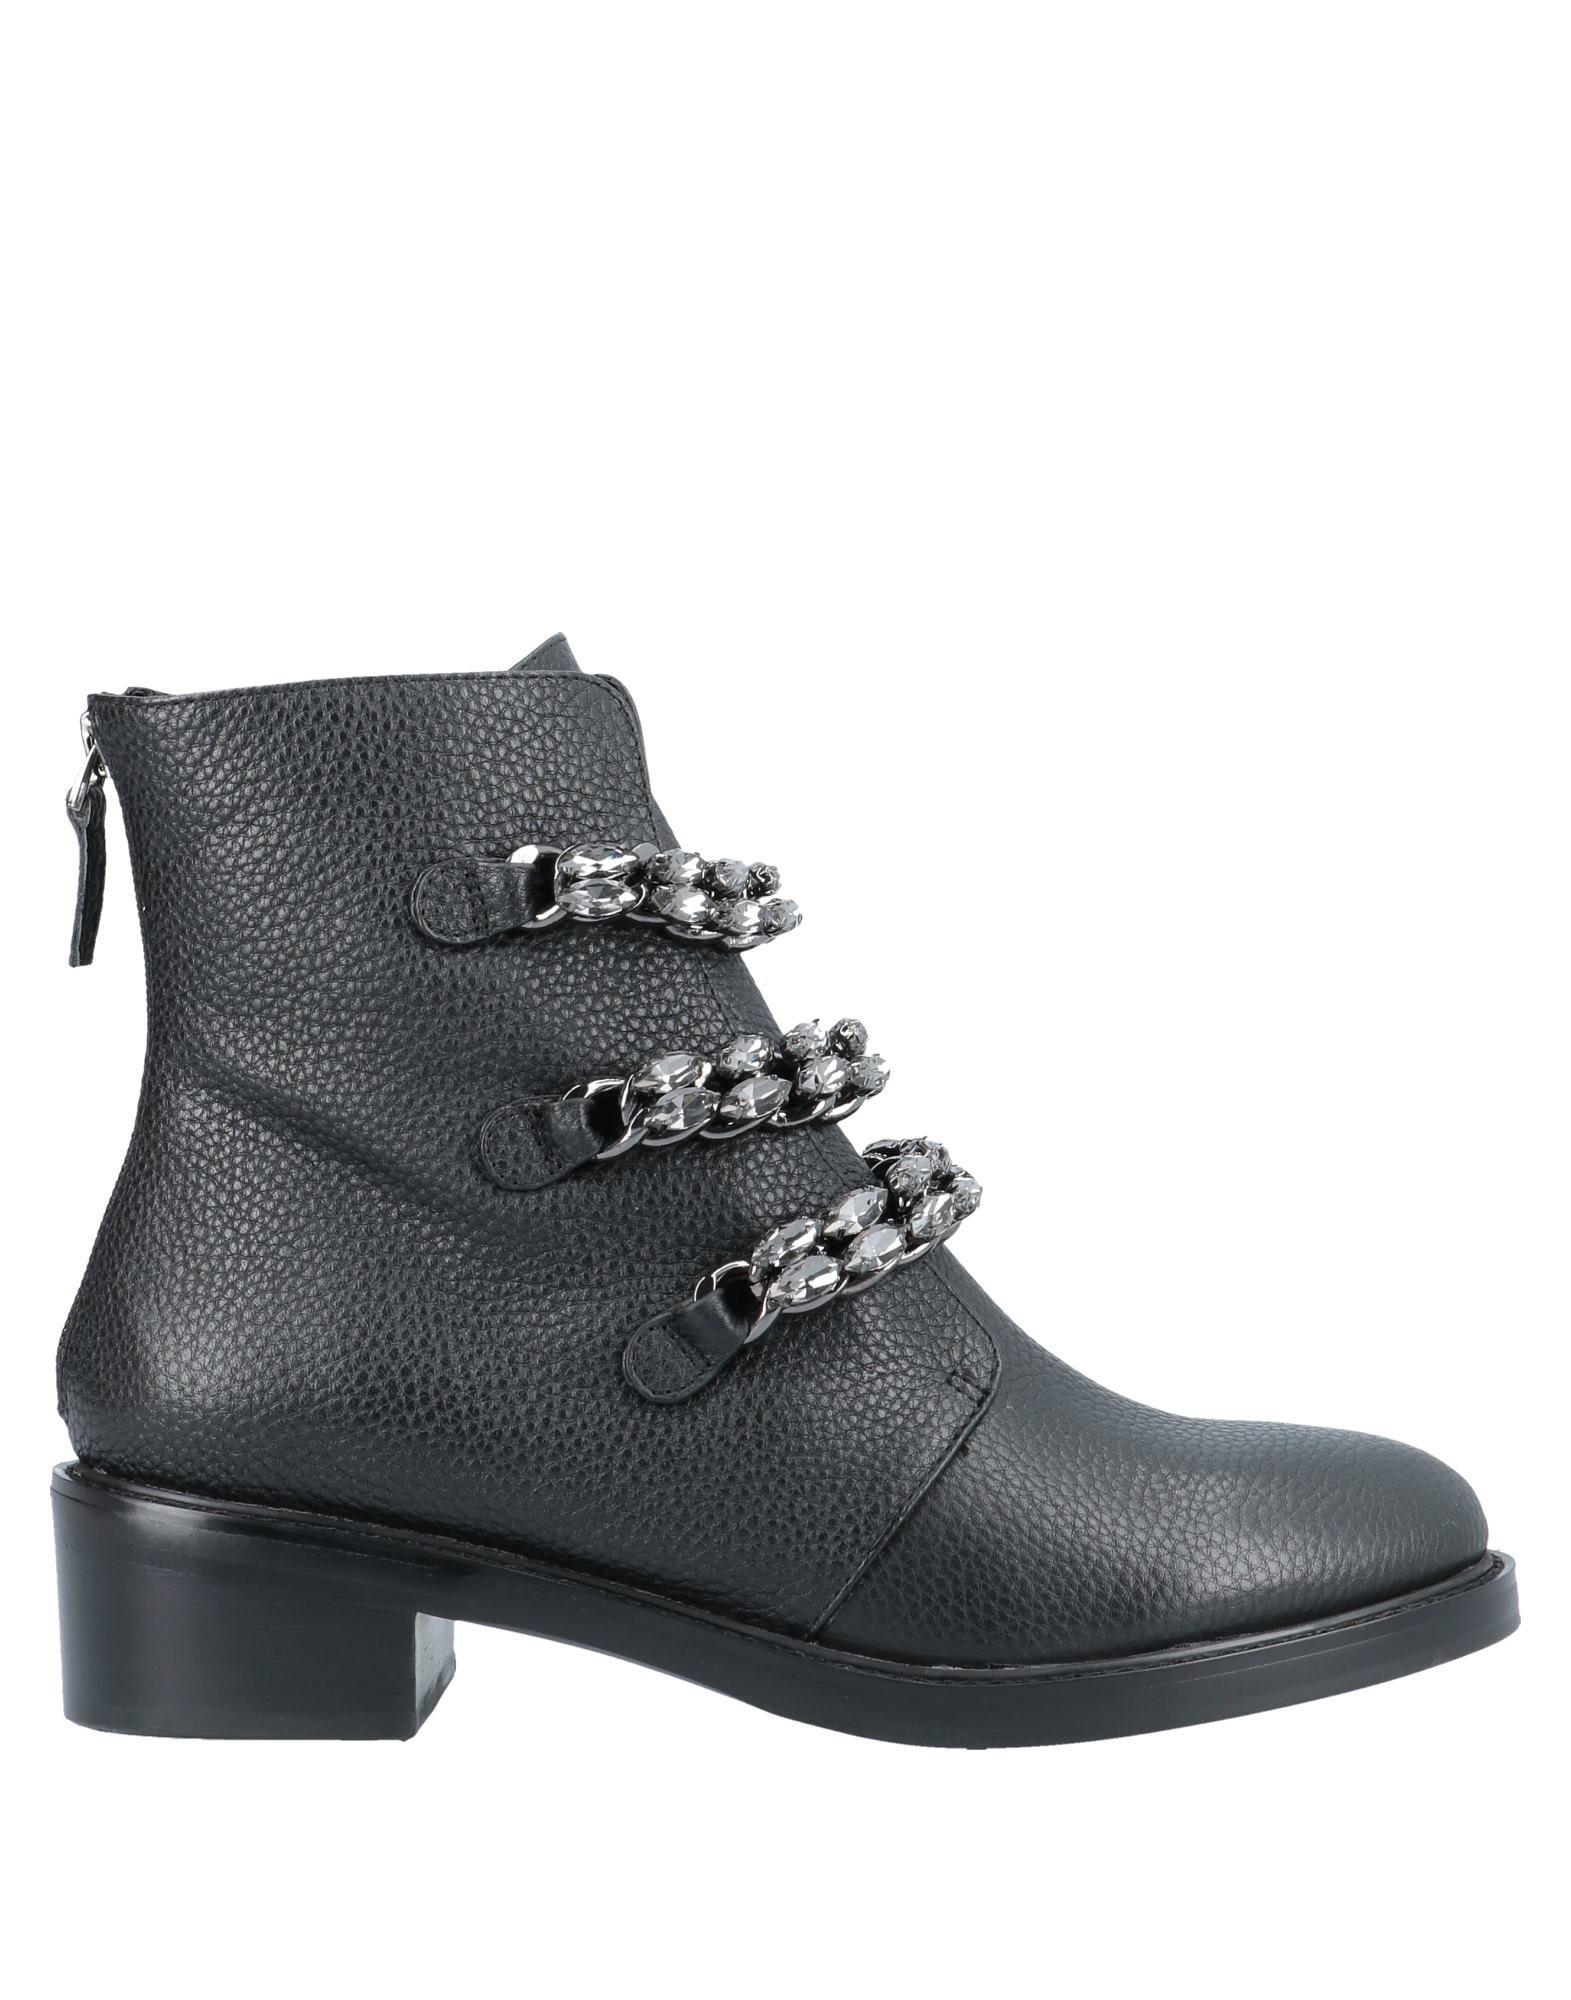 Lola Cruz Leather Ankle Boots in Black - Lyst